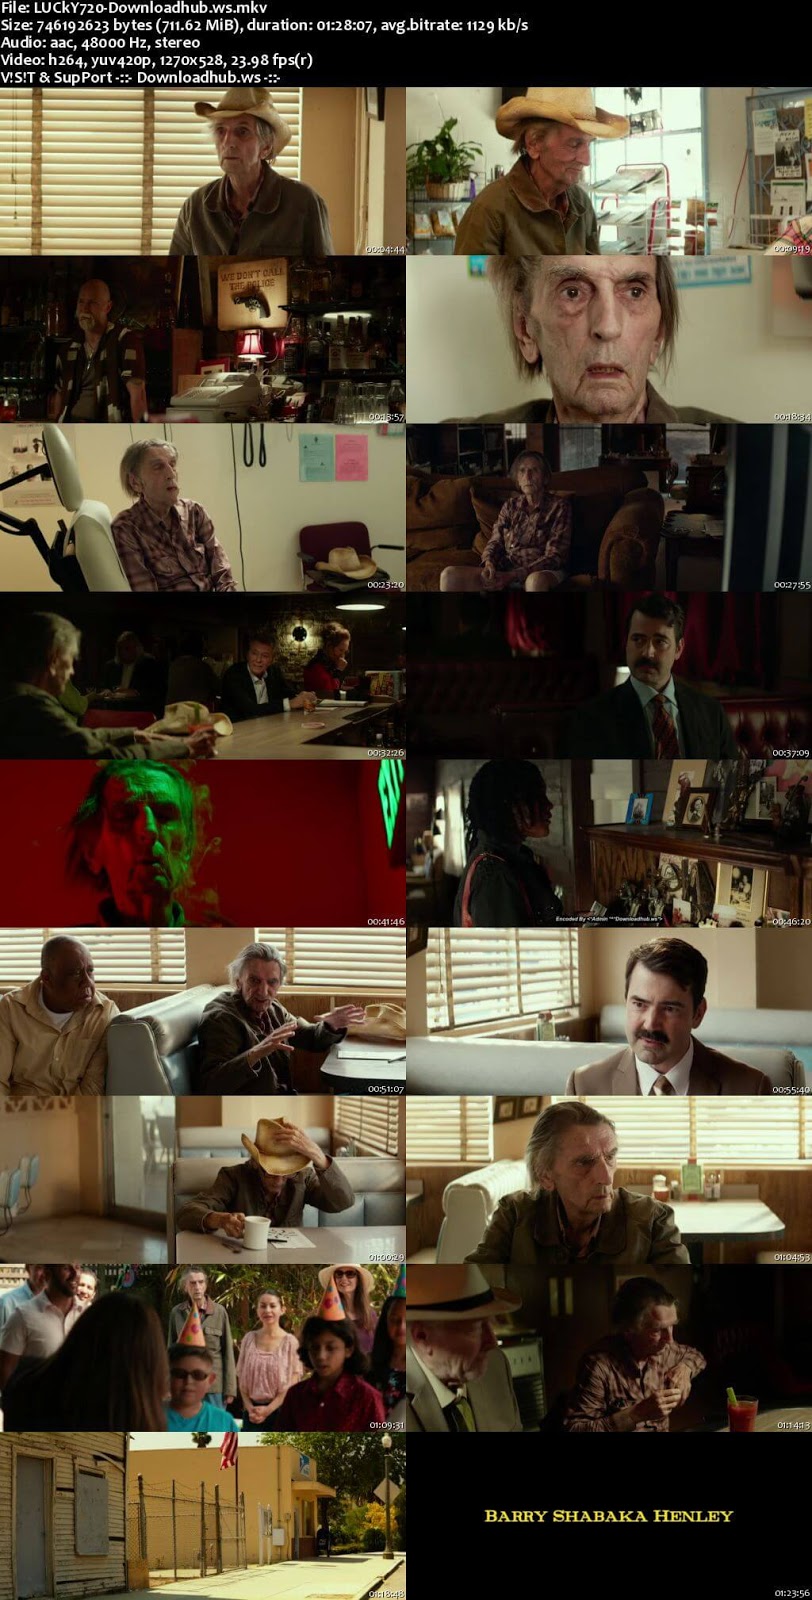 Lucky 2017 English 720p Web-DL 700MB